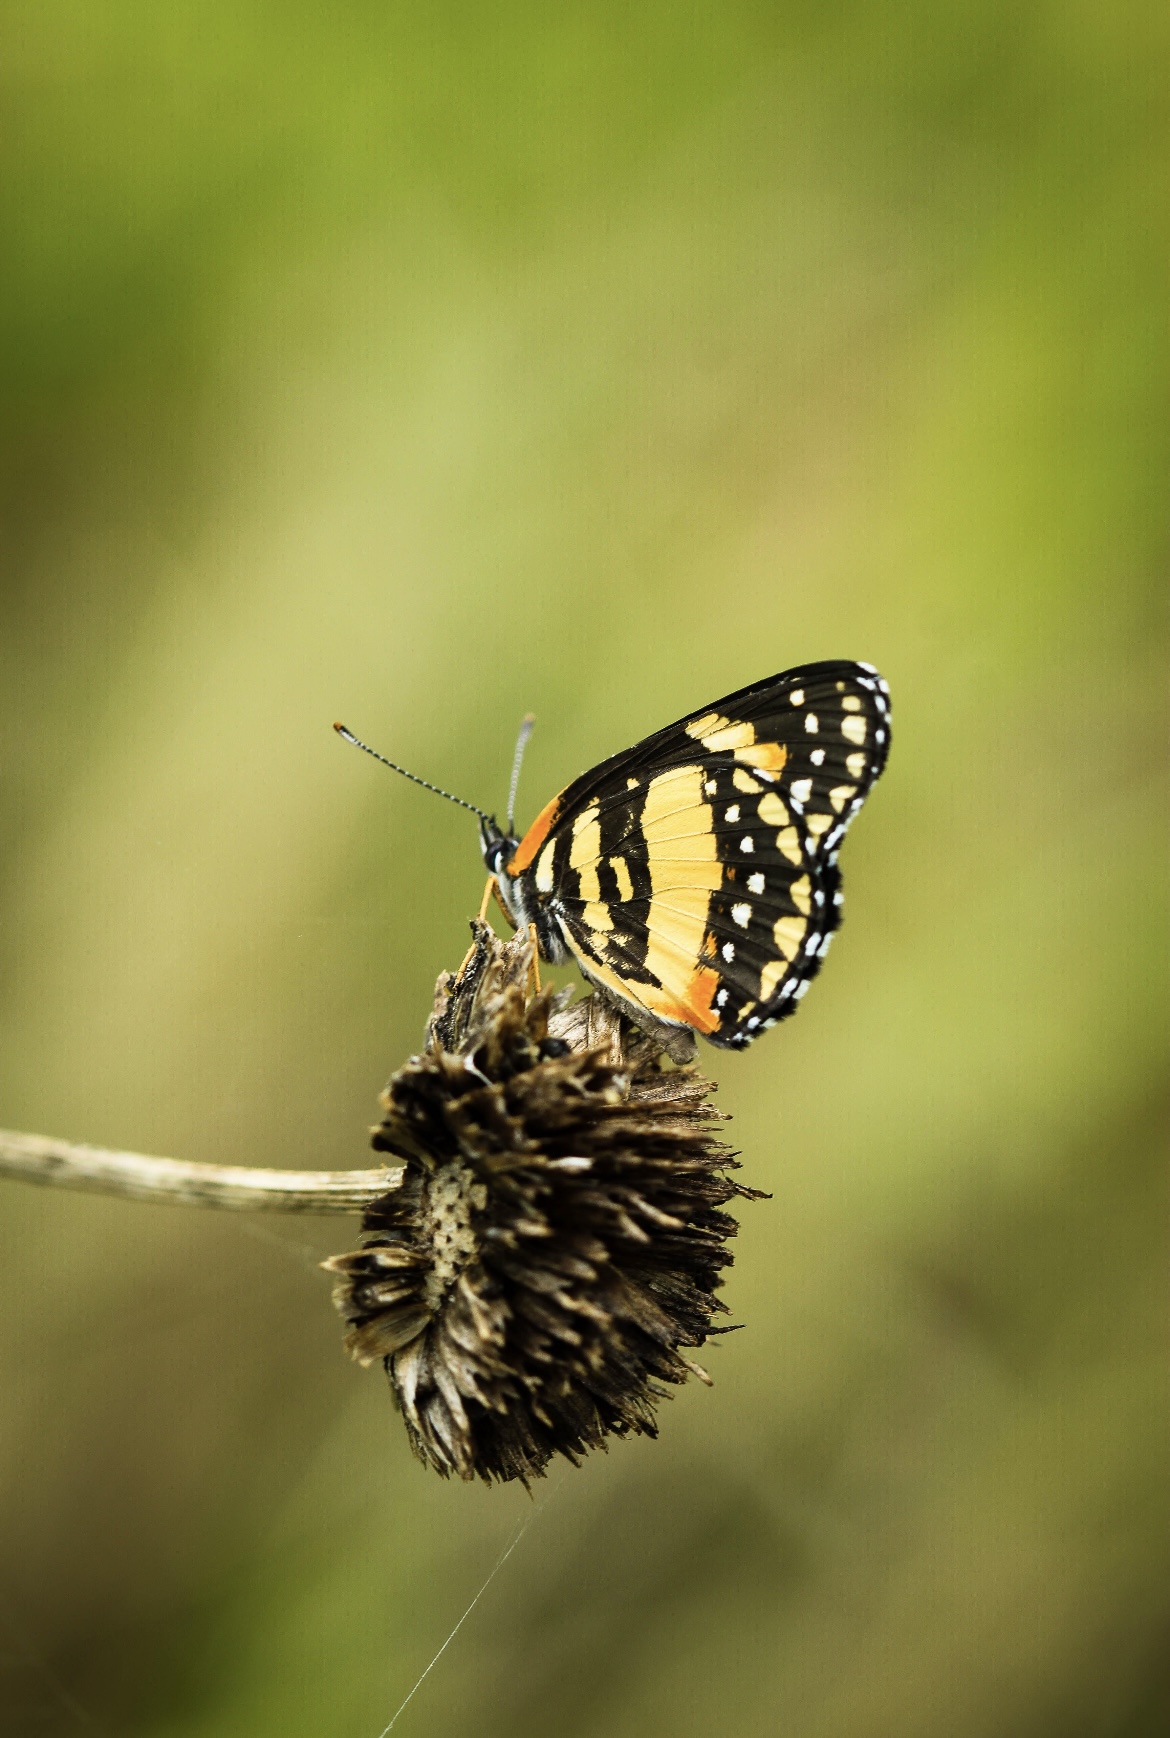 Adult butterfly